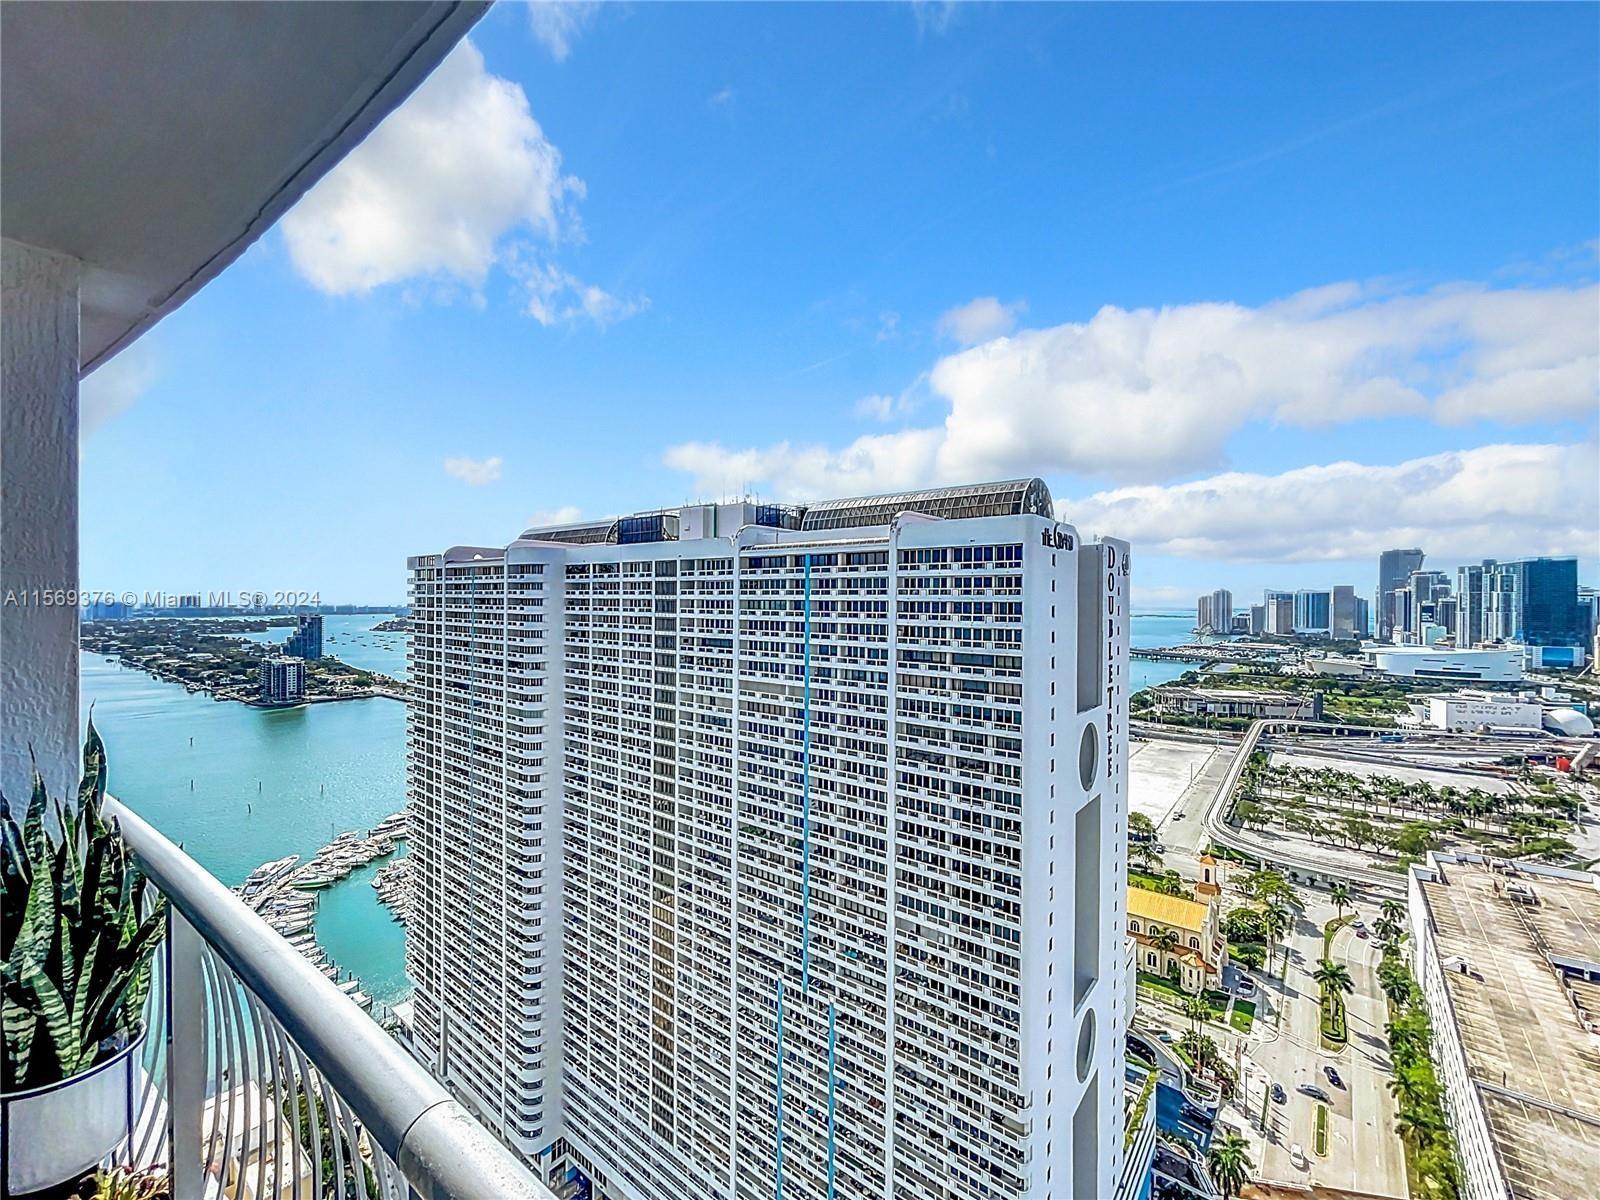 Luxurious studio unit in Miami's Media & Entertainment District, within Opera Tower. Offers stunning views, modern design, and high-end finishes. Features spacious living area, kitchen with top-of-the-line appliances, luxurious bathroom, and unique bed lift system. Oversized terrace with breathtaking views. Amenities include fitness center, pool, and 24-hour concierge. Well-managed HOA with robust reserves. Prime location near cultural attractions. Experience the epitome of waterfront living in Miami. Contact for private viewing.